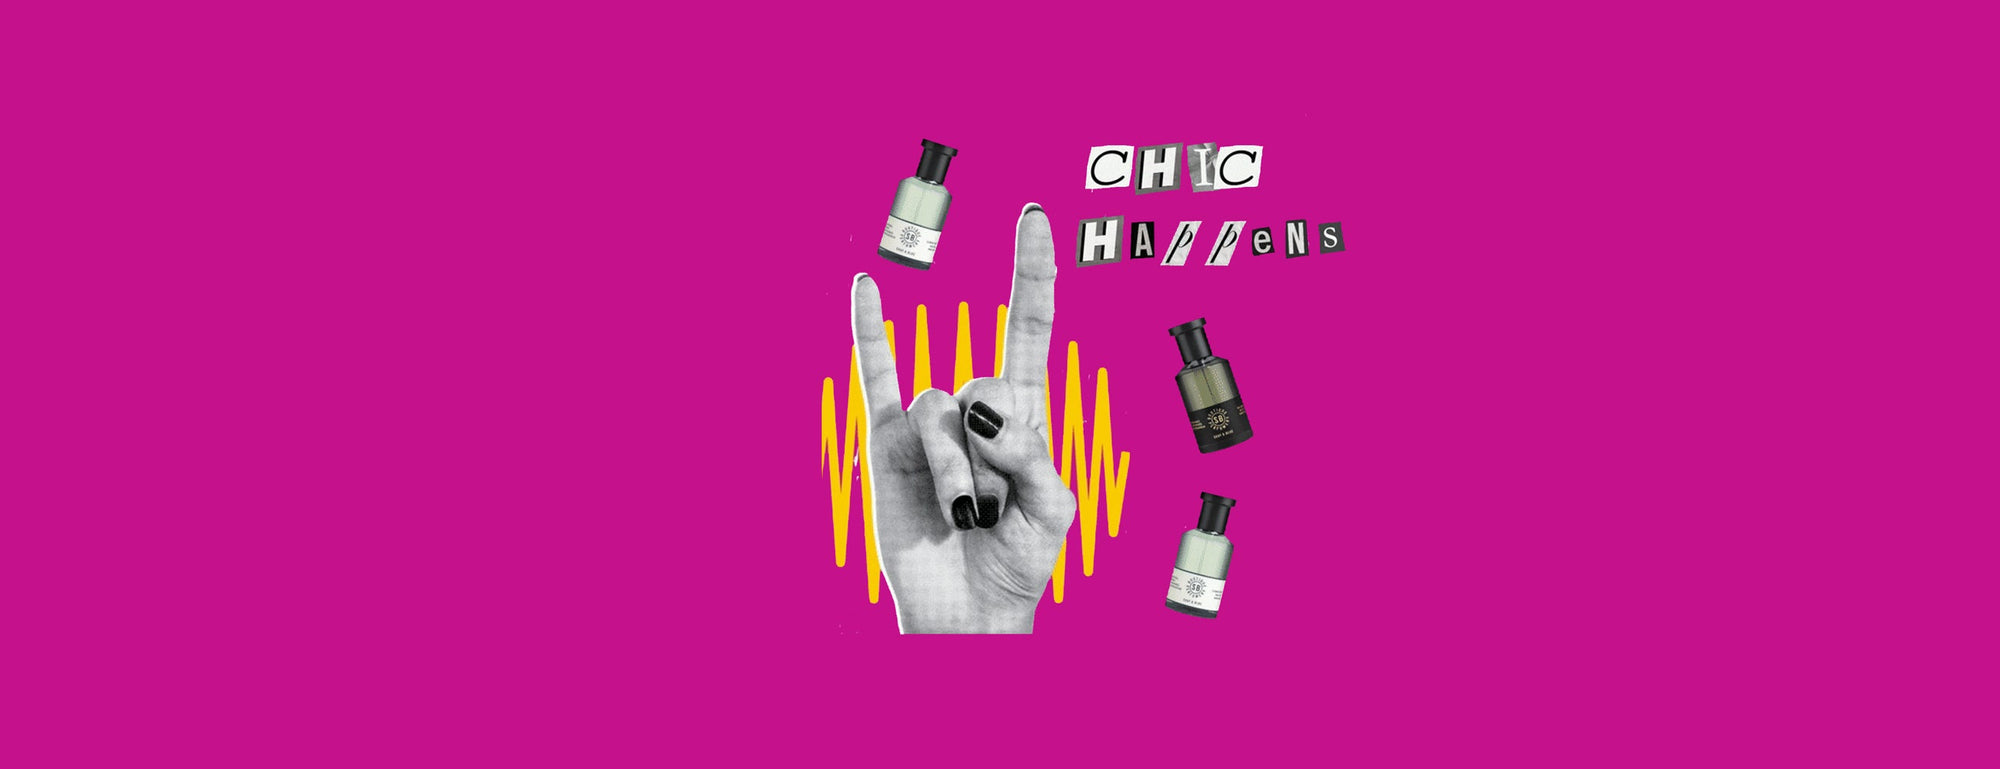 CHIC HAPPENS - FIND YOUR SCENTS OF STYLE